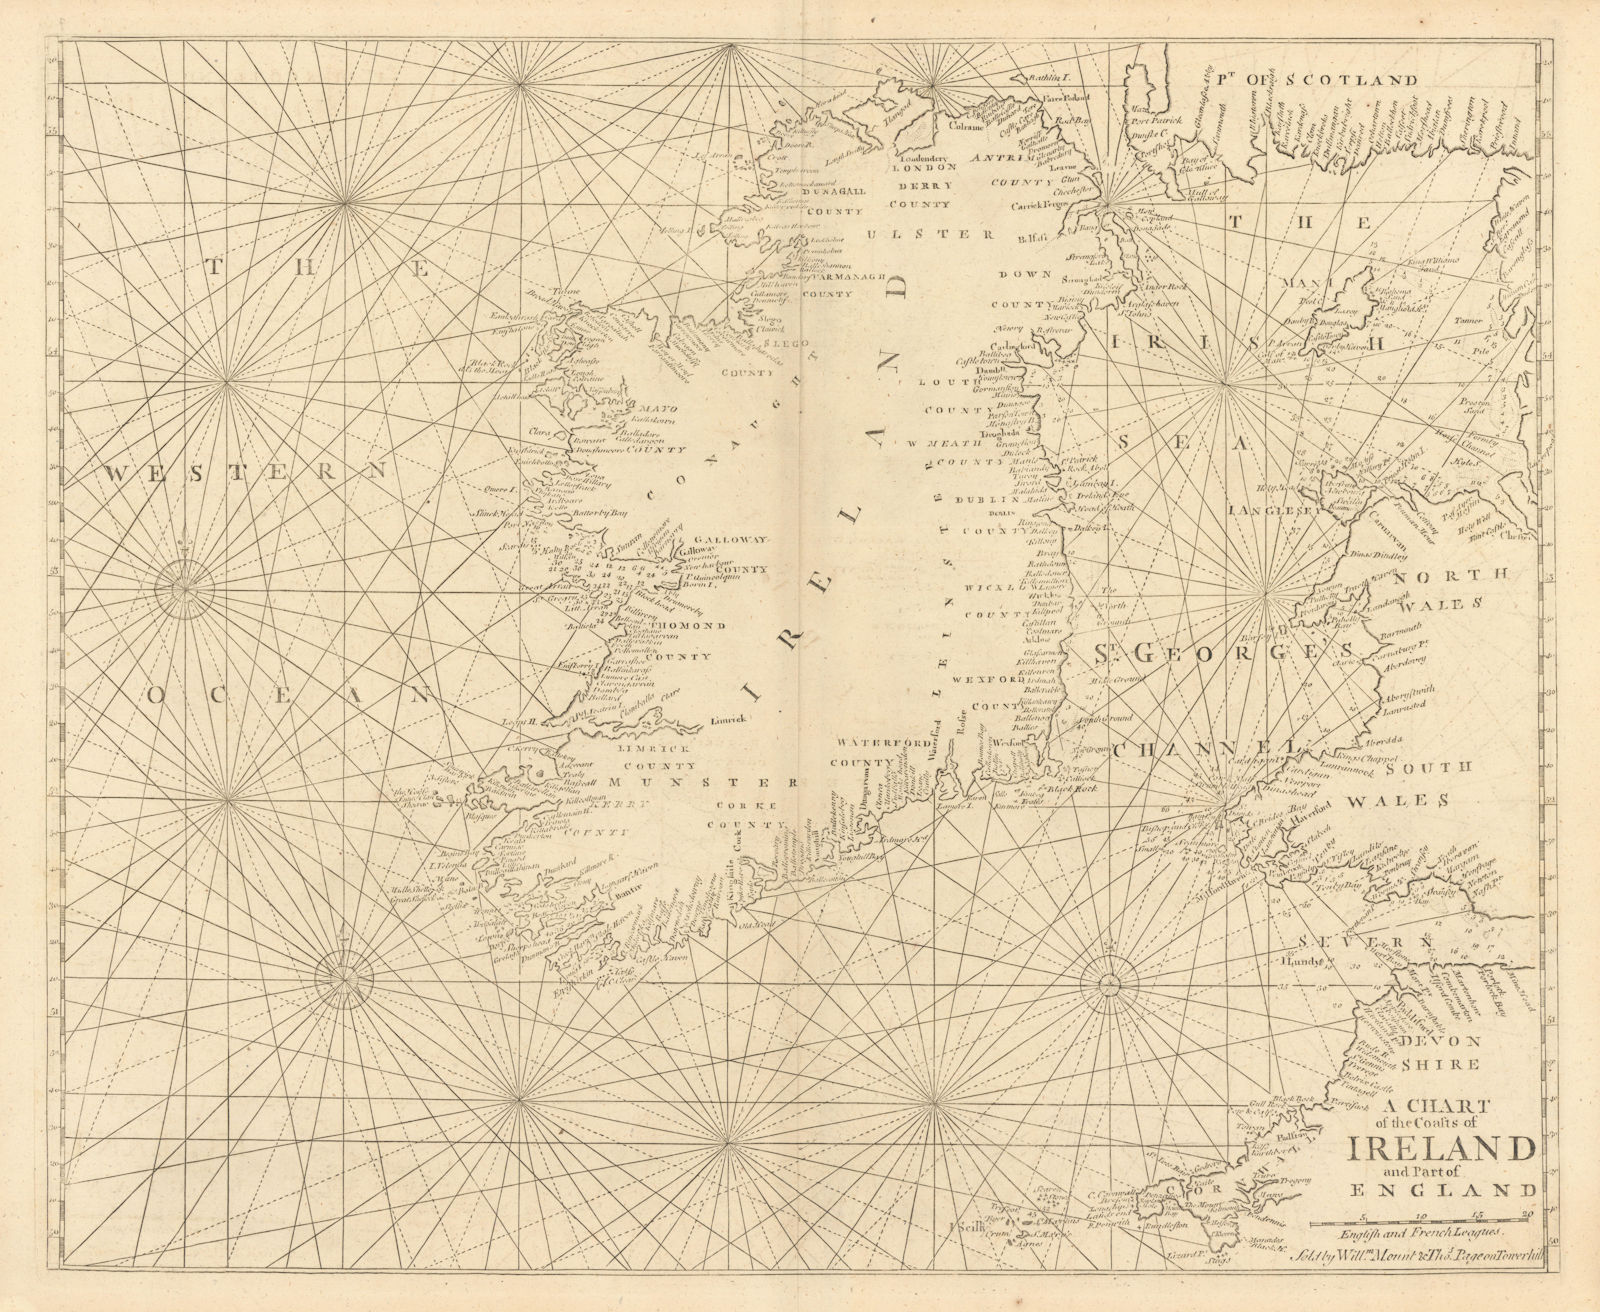 A Chart of the Coasts of Ireland & part of England. Wales. MOUNT & PAGE 1758 map